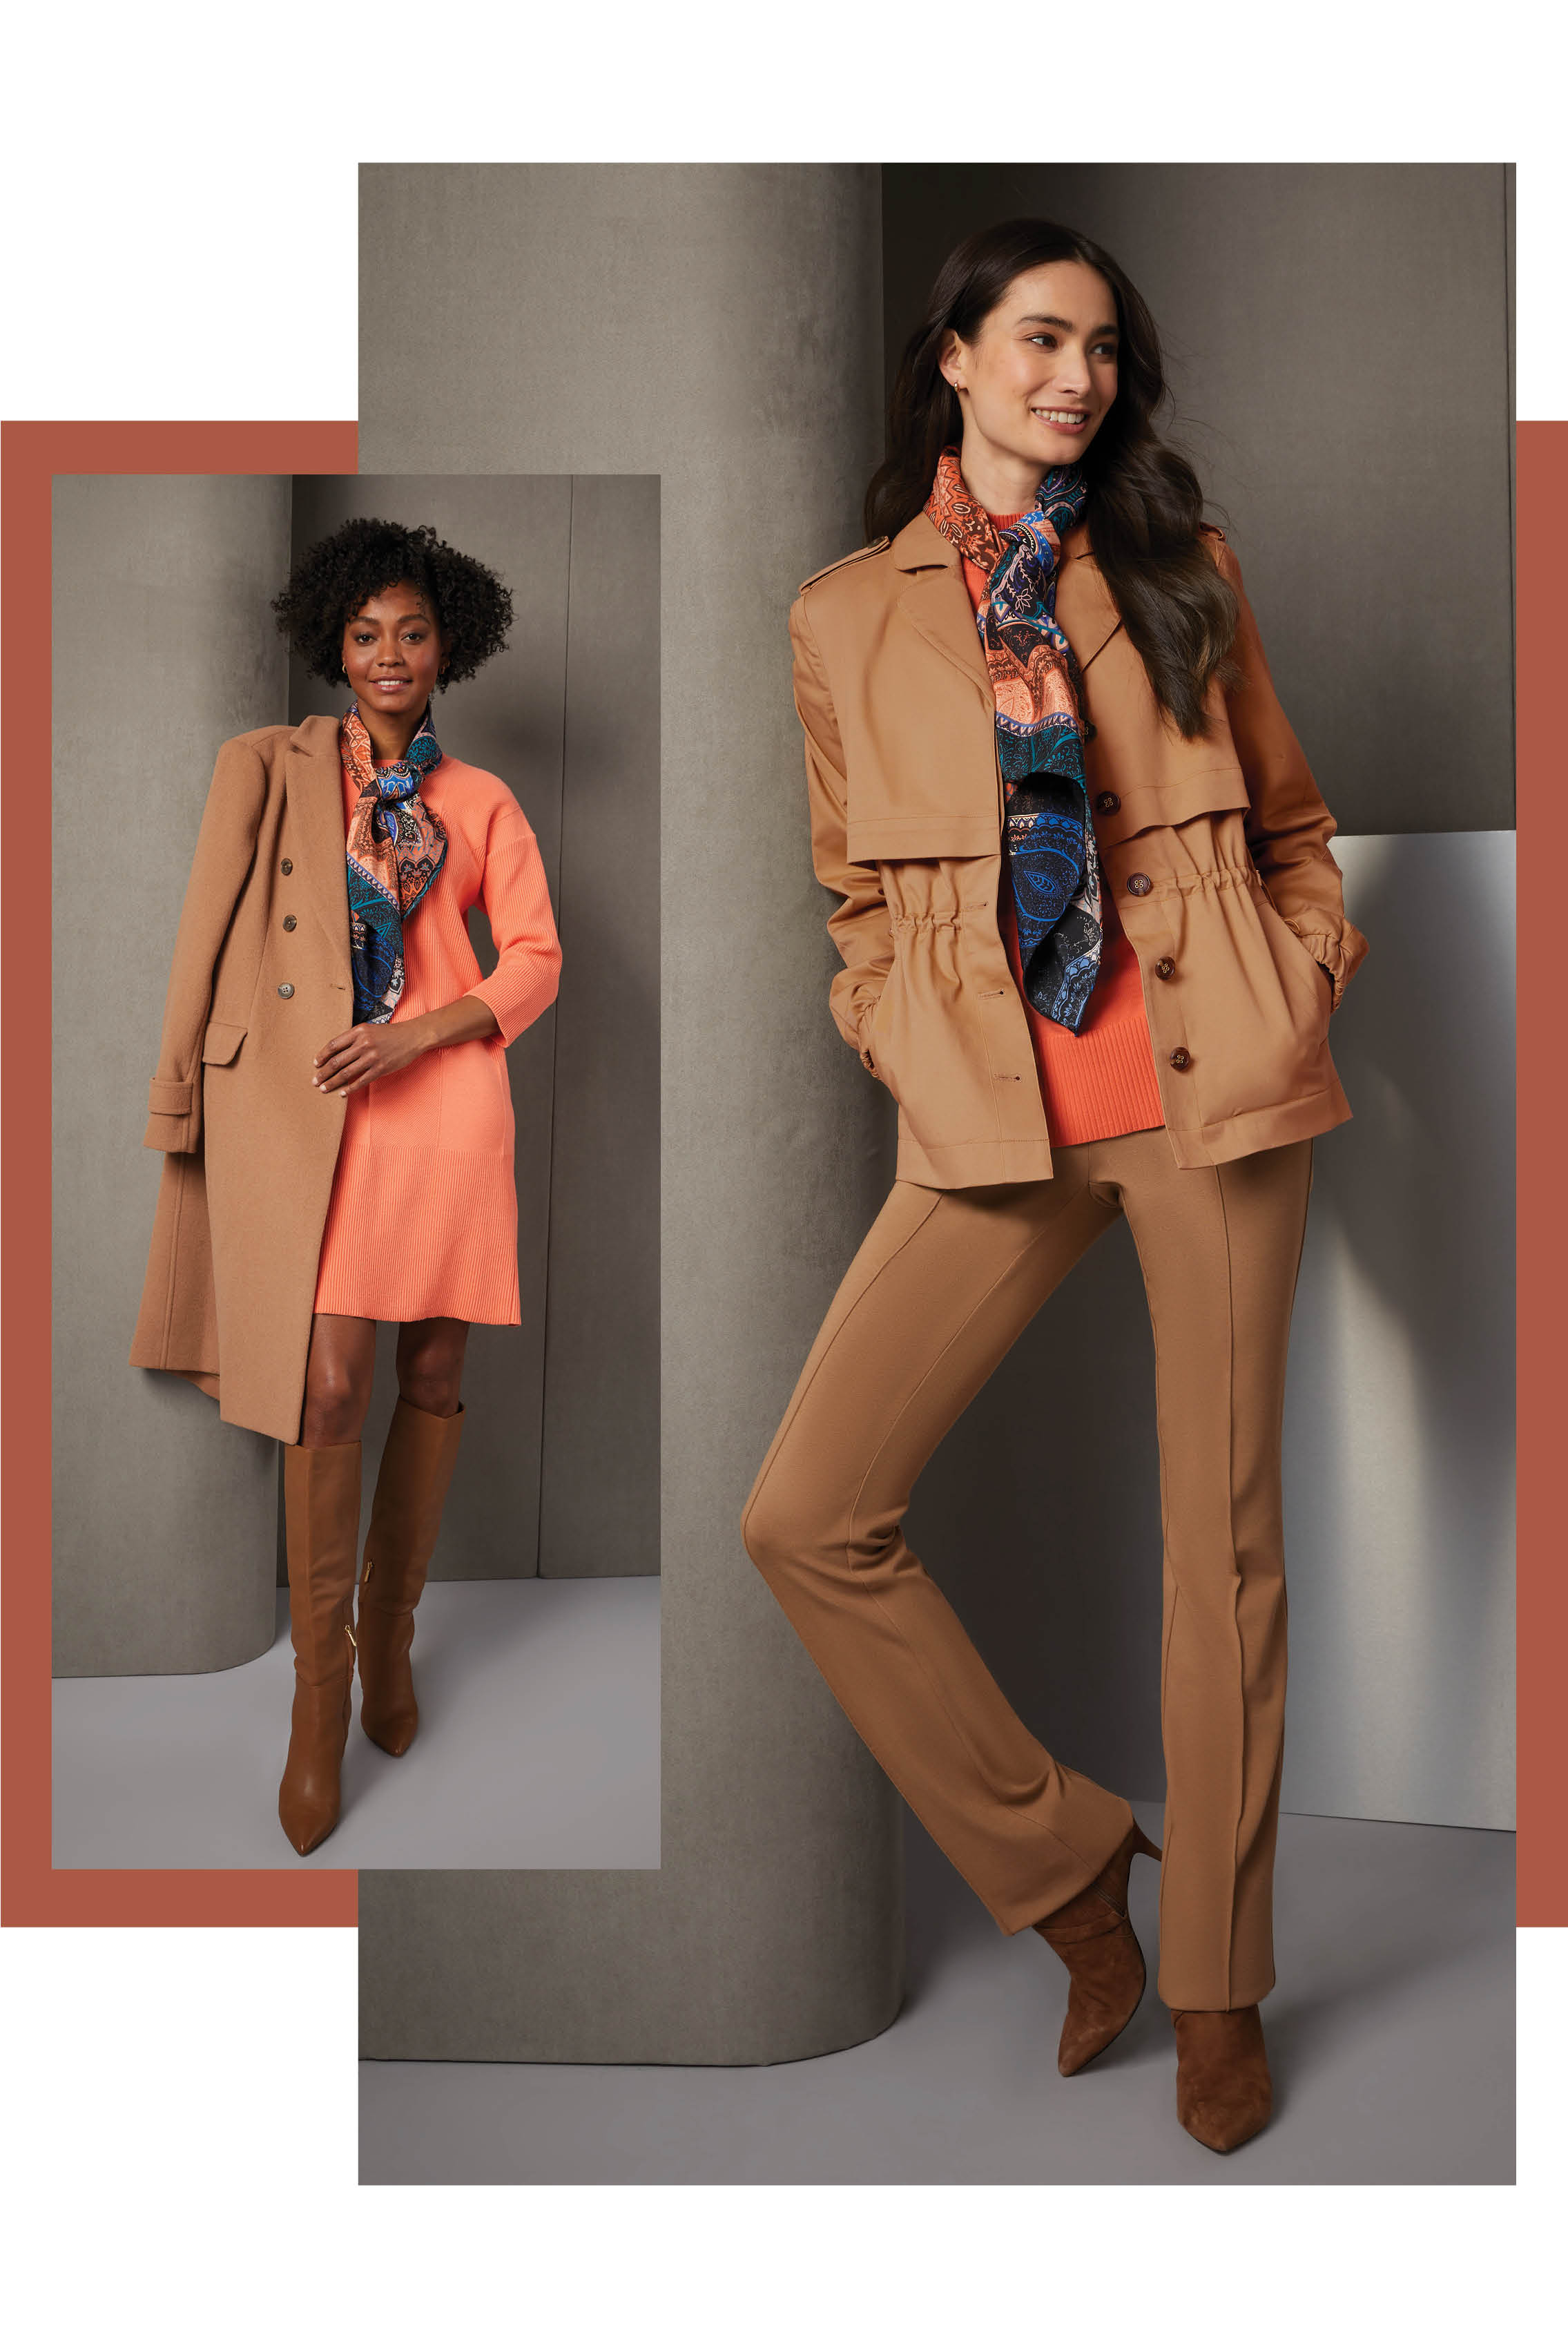 Experience the epitome of comfort with an easy fitting, cashmere-softened cotton knit dress, energized with an Ottoman rib texture. Its rich apricot color is echoed by the romantic scarf in a Moroccan paisley print of ten rich colors.